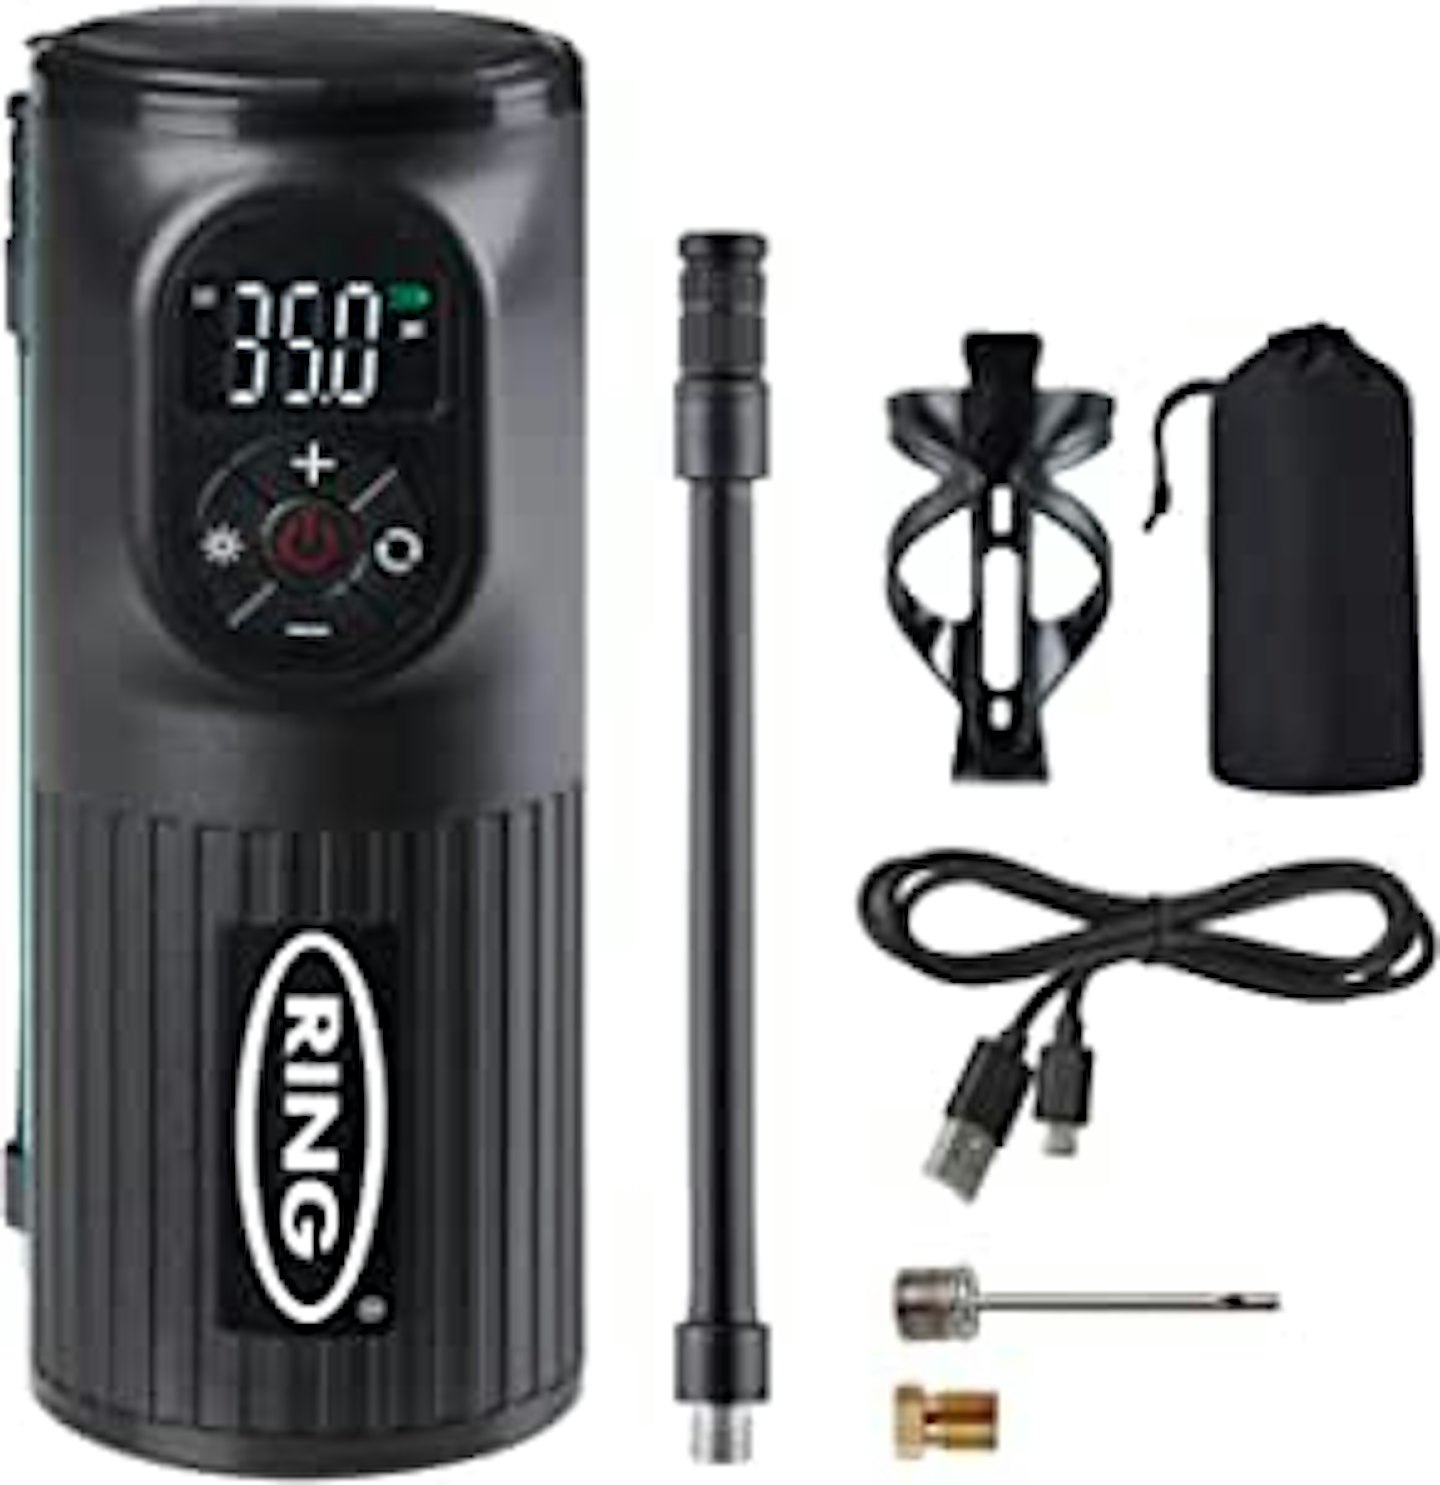 Ring Automotive RTC2000 digital cordless handheld rechargeable tyre inflator